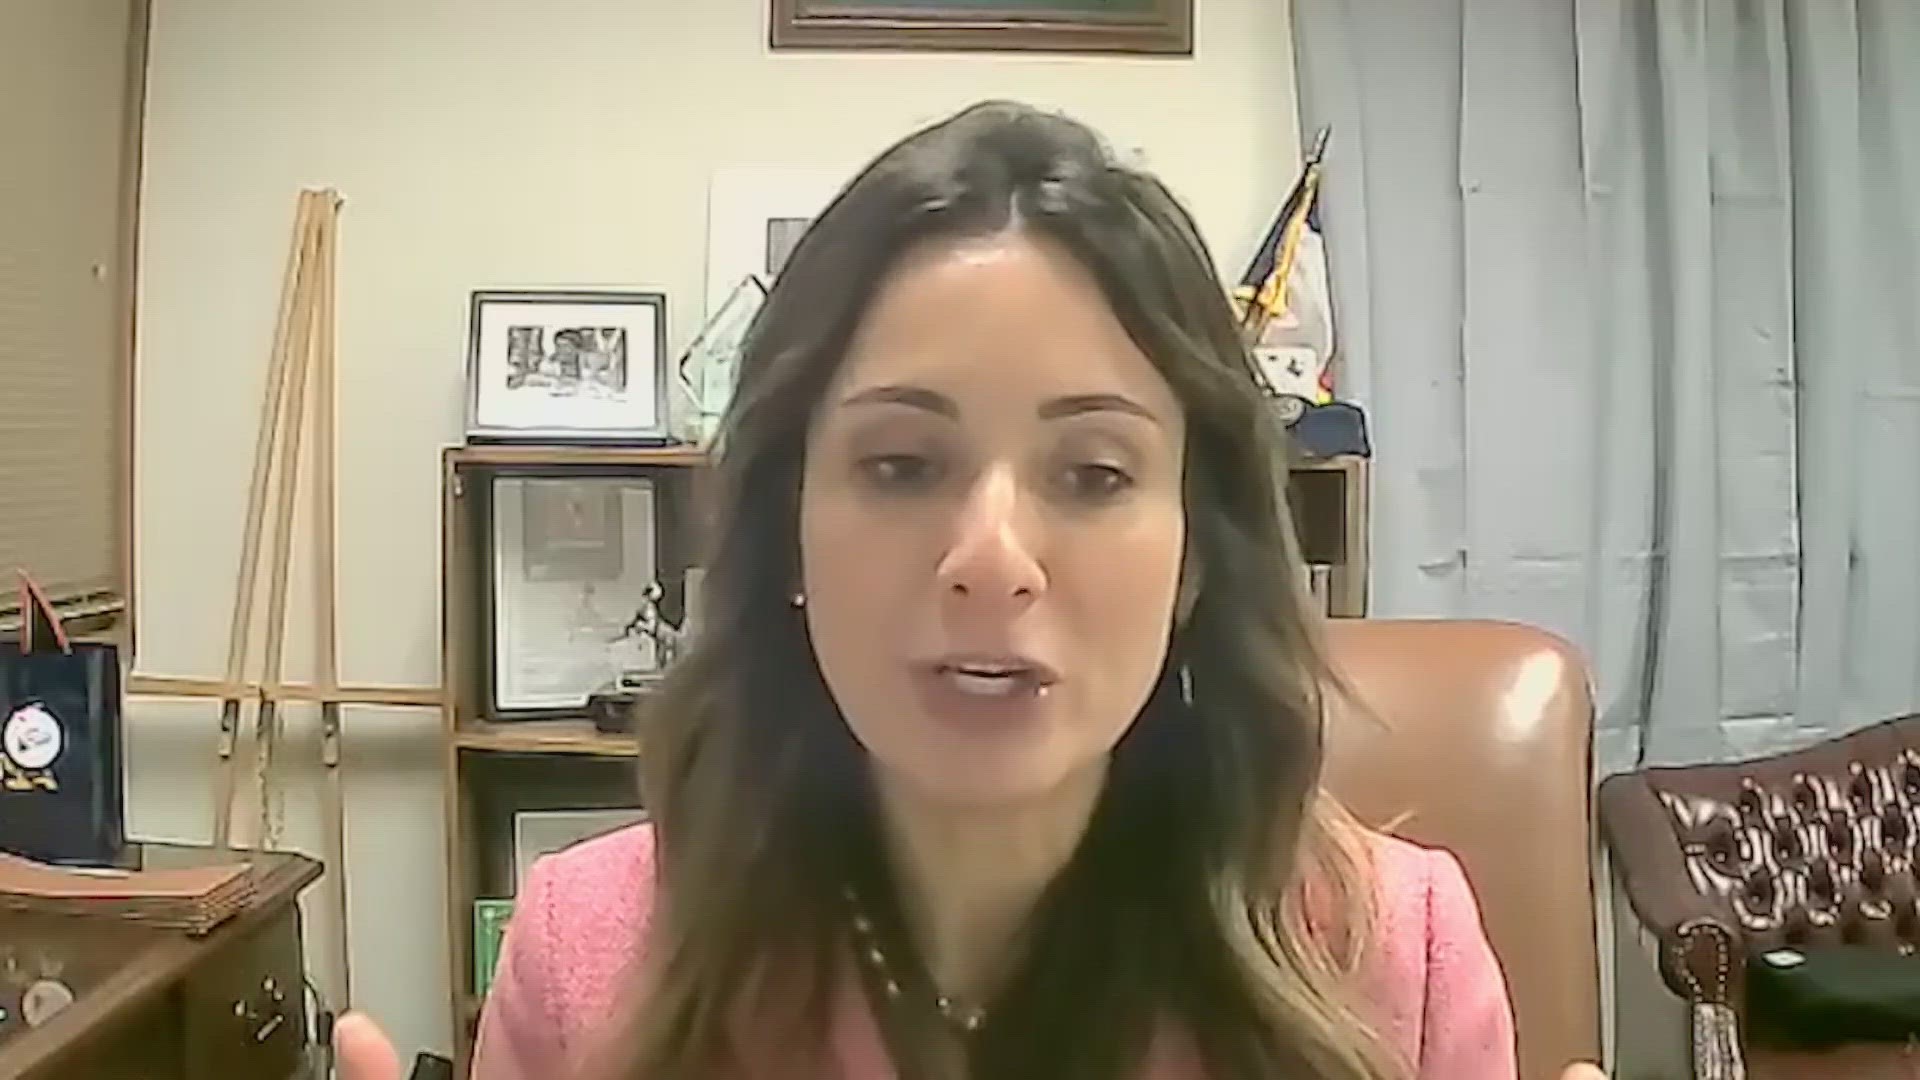 Hear from a Texas state representative on how she thinks schools should receive funds.